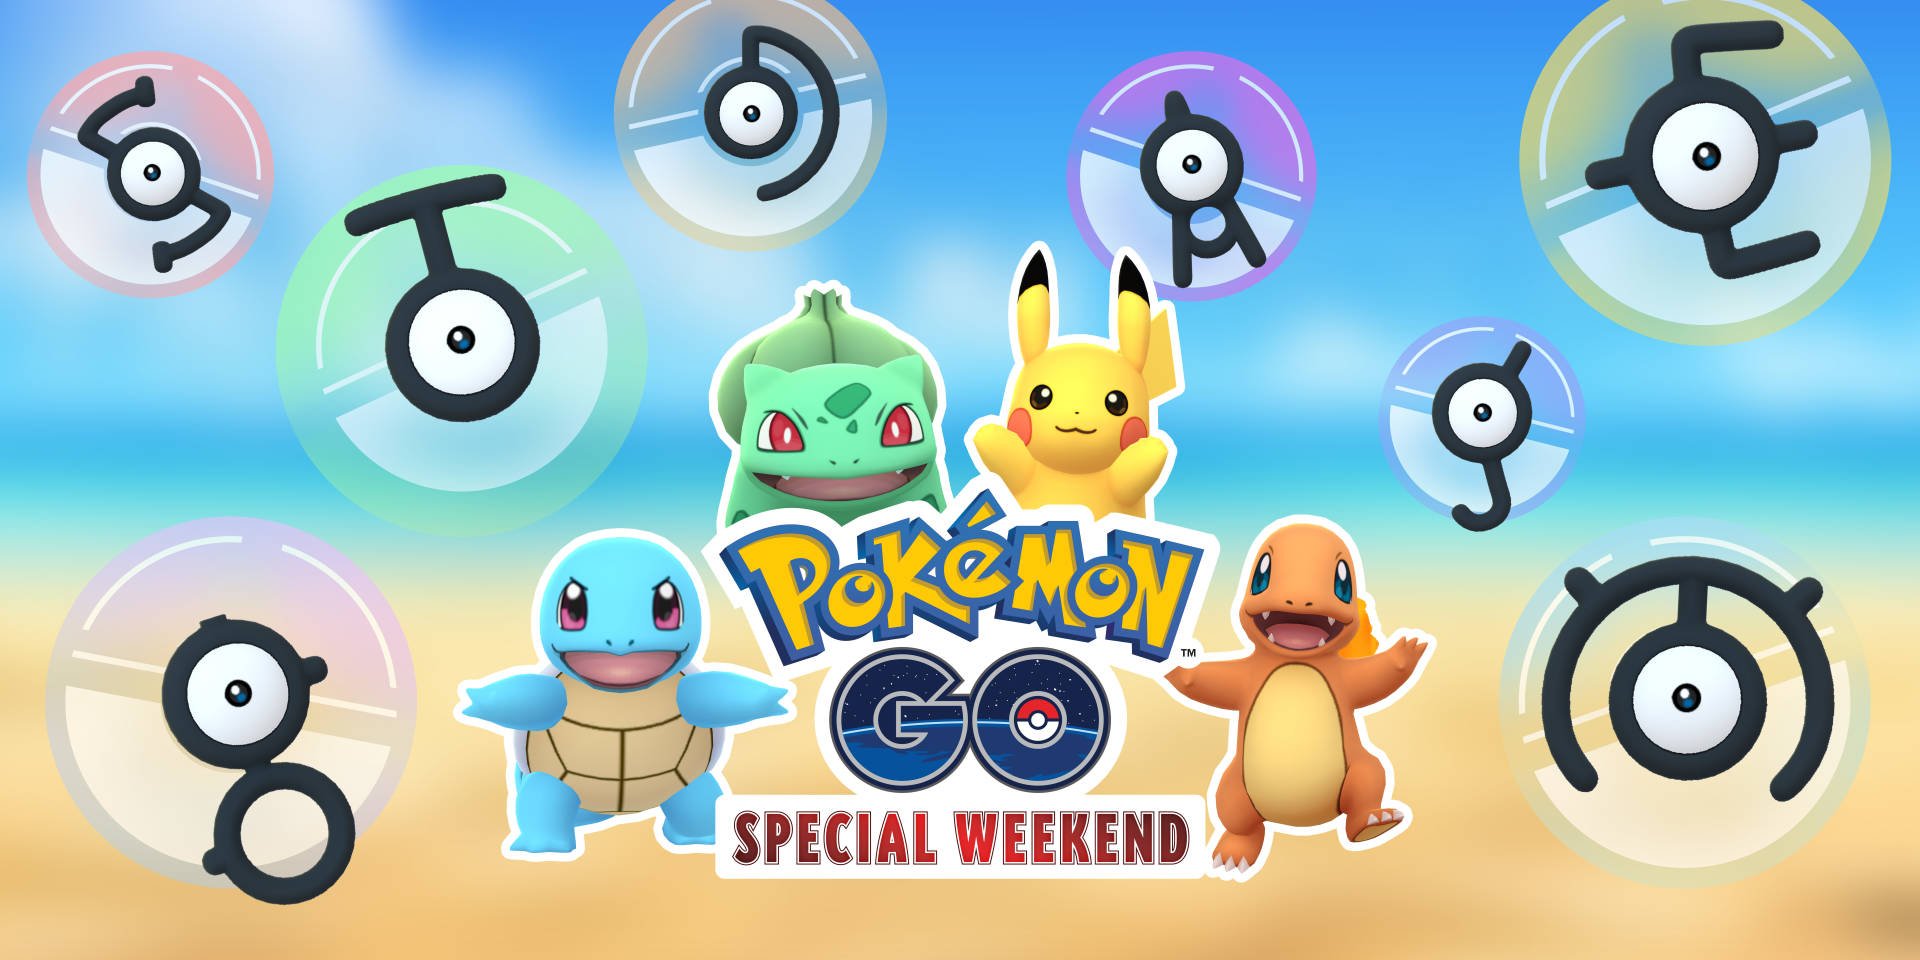 Pokemon Go Special Weekend Event Takes Place In Japan From July 26 To July 29 Pokemon Go Hub